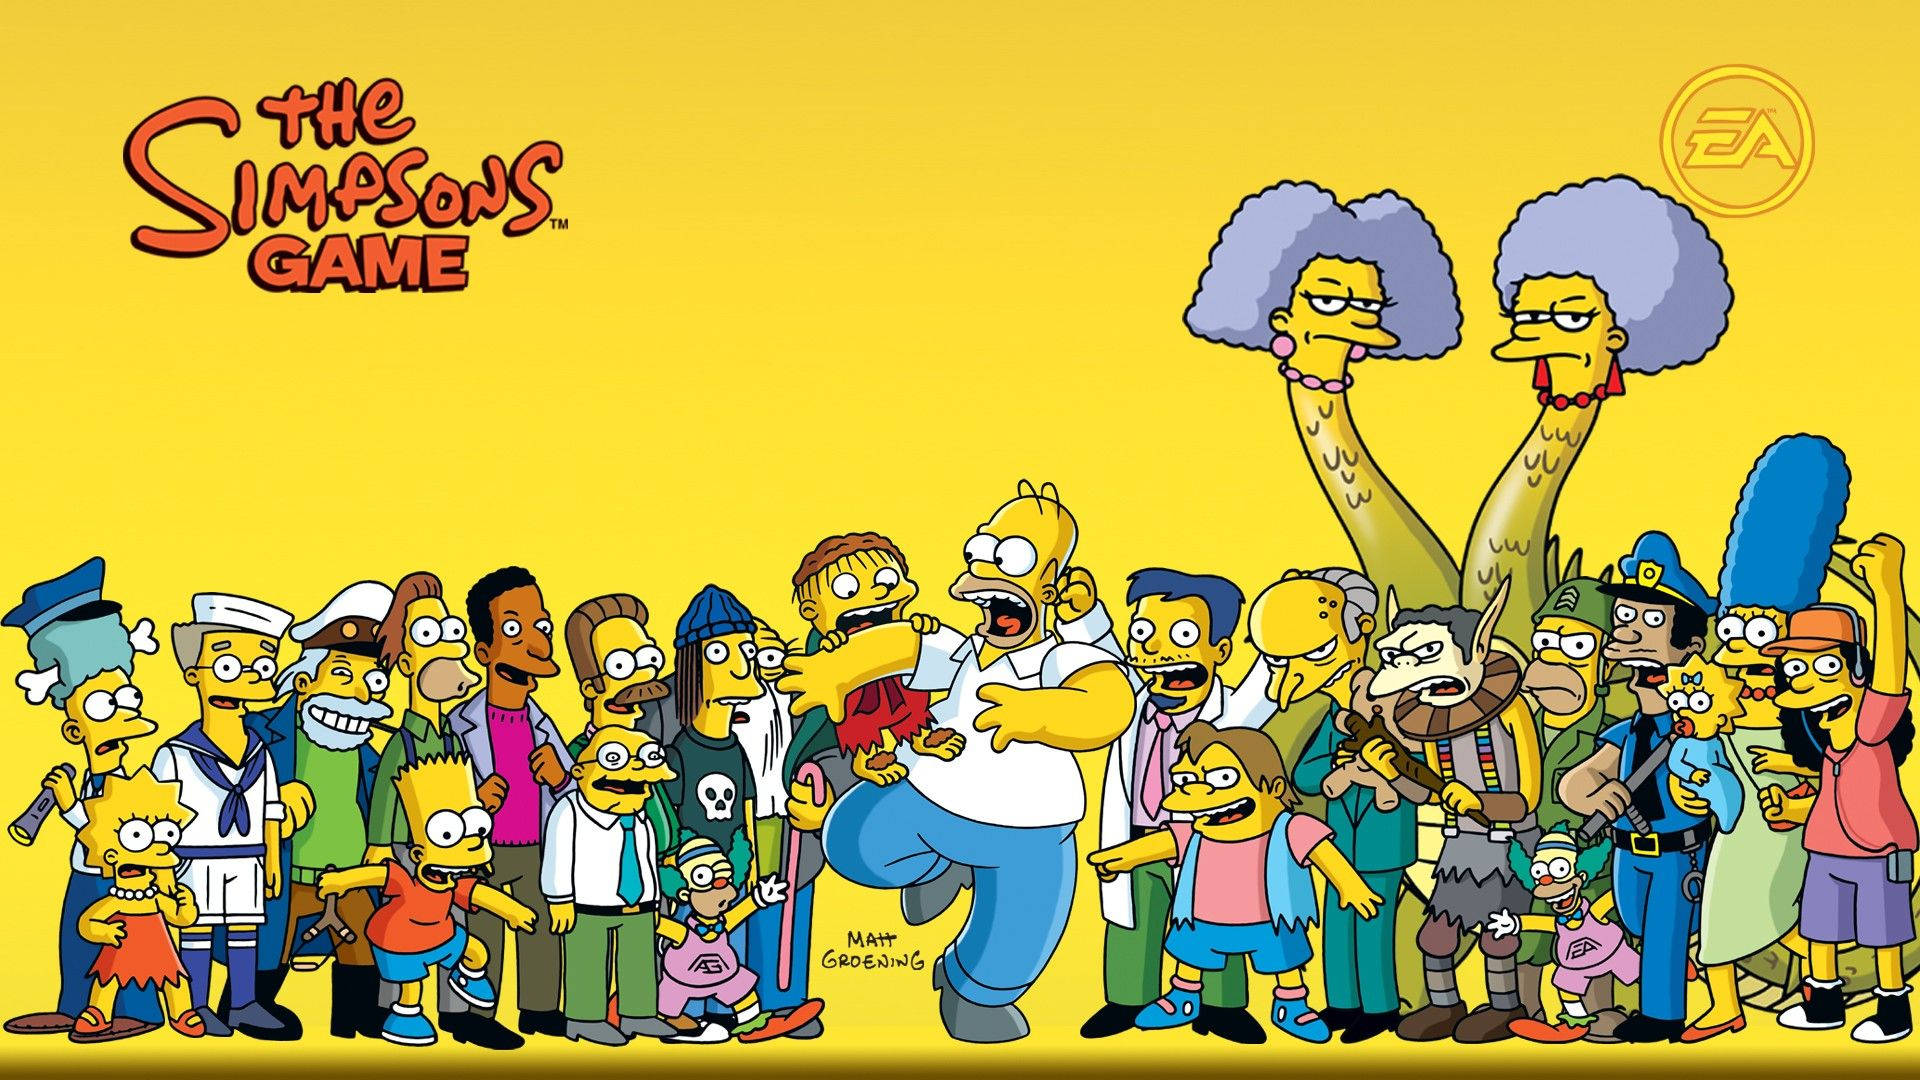 Marge Simpsons The Simpsons Game Wallpaper